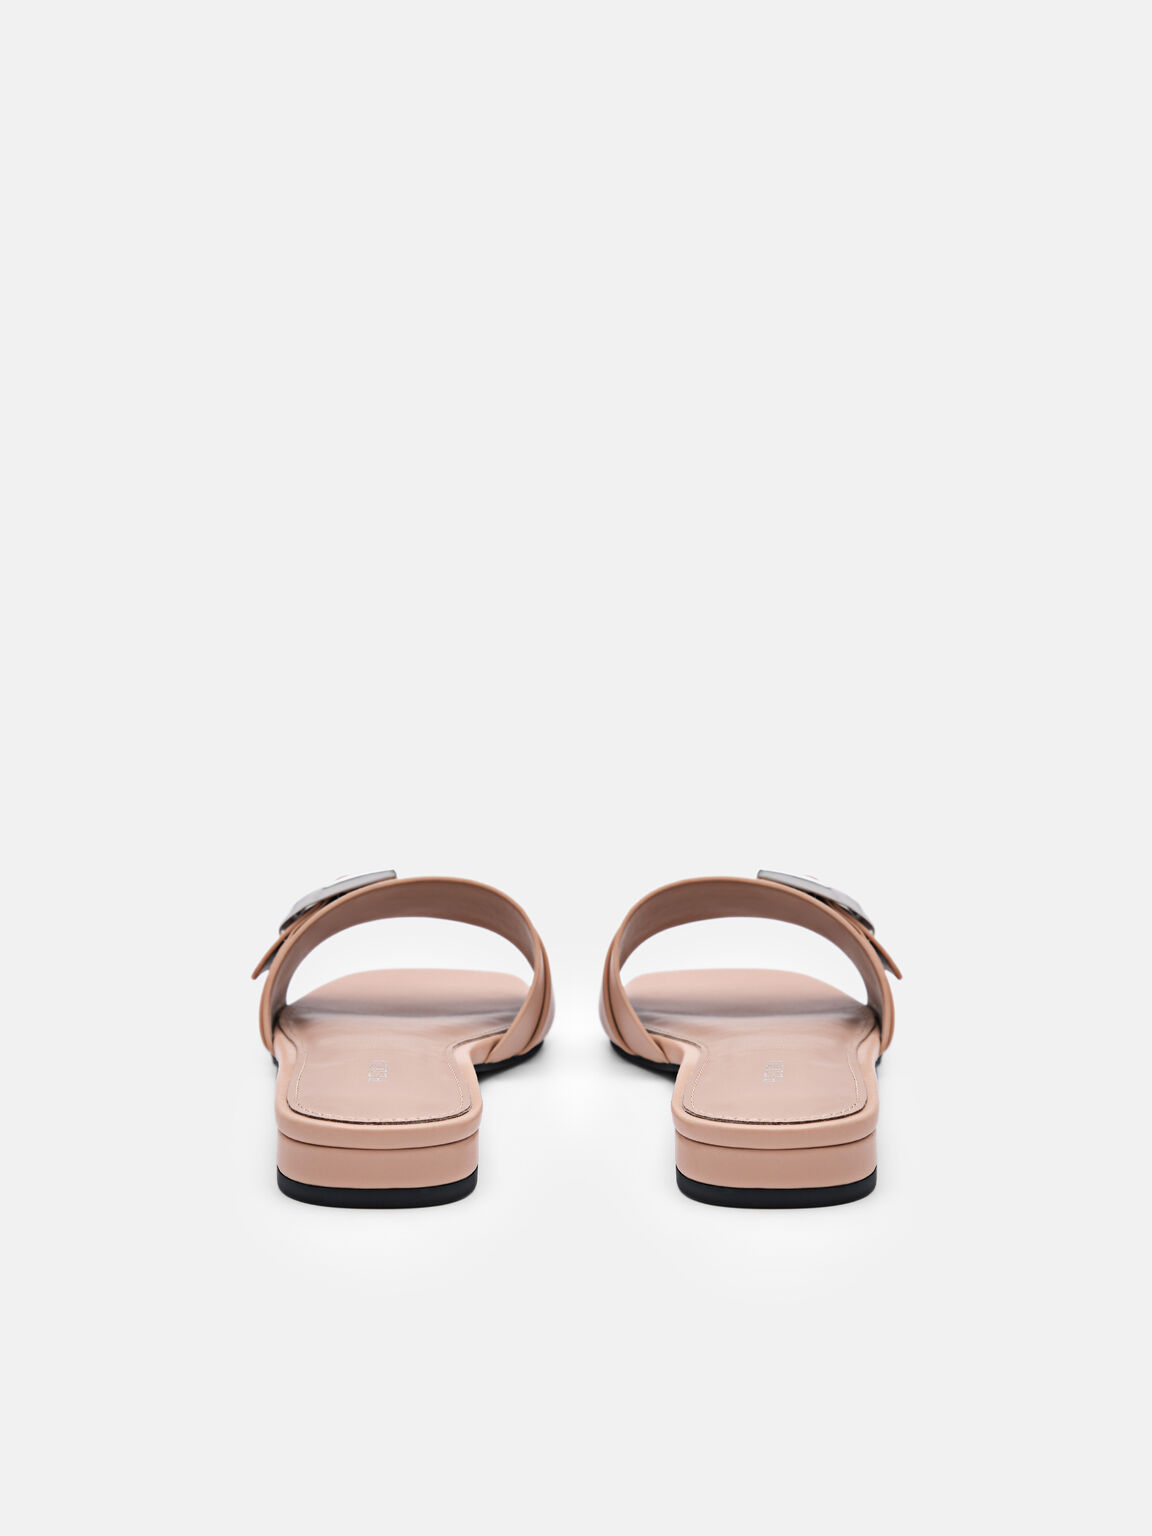 Helix Buckle Sandals, Taupe